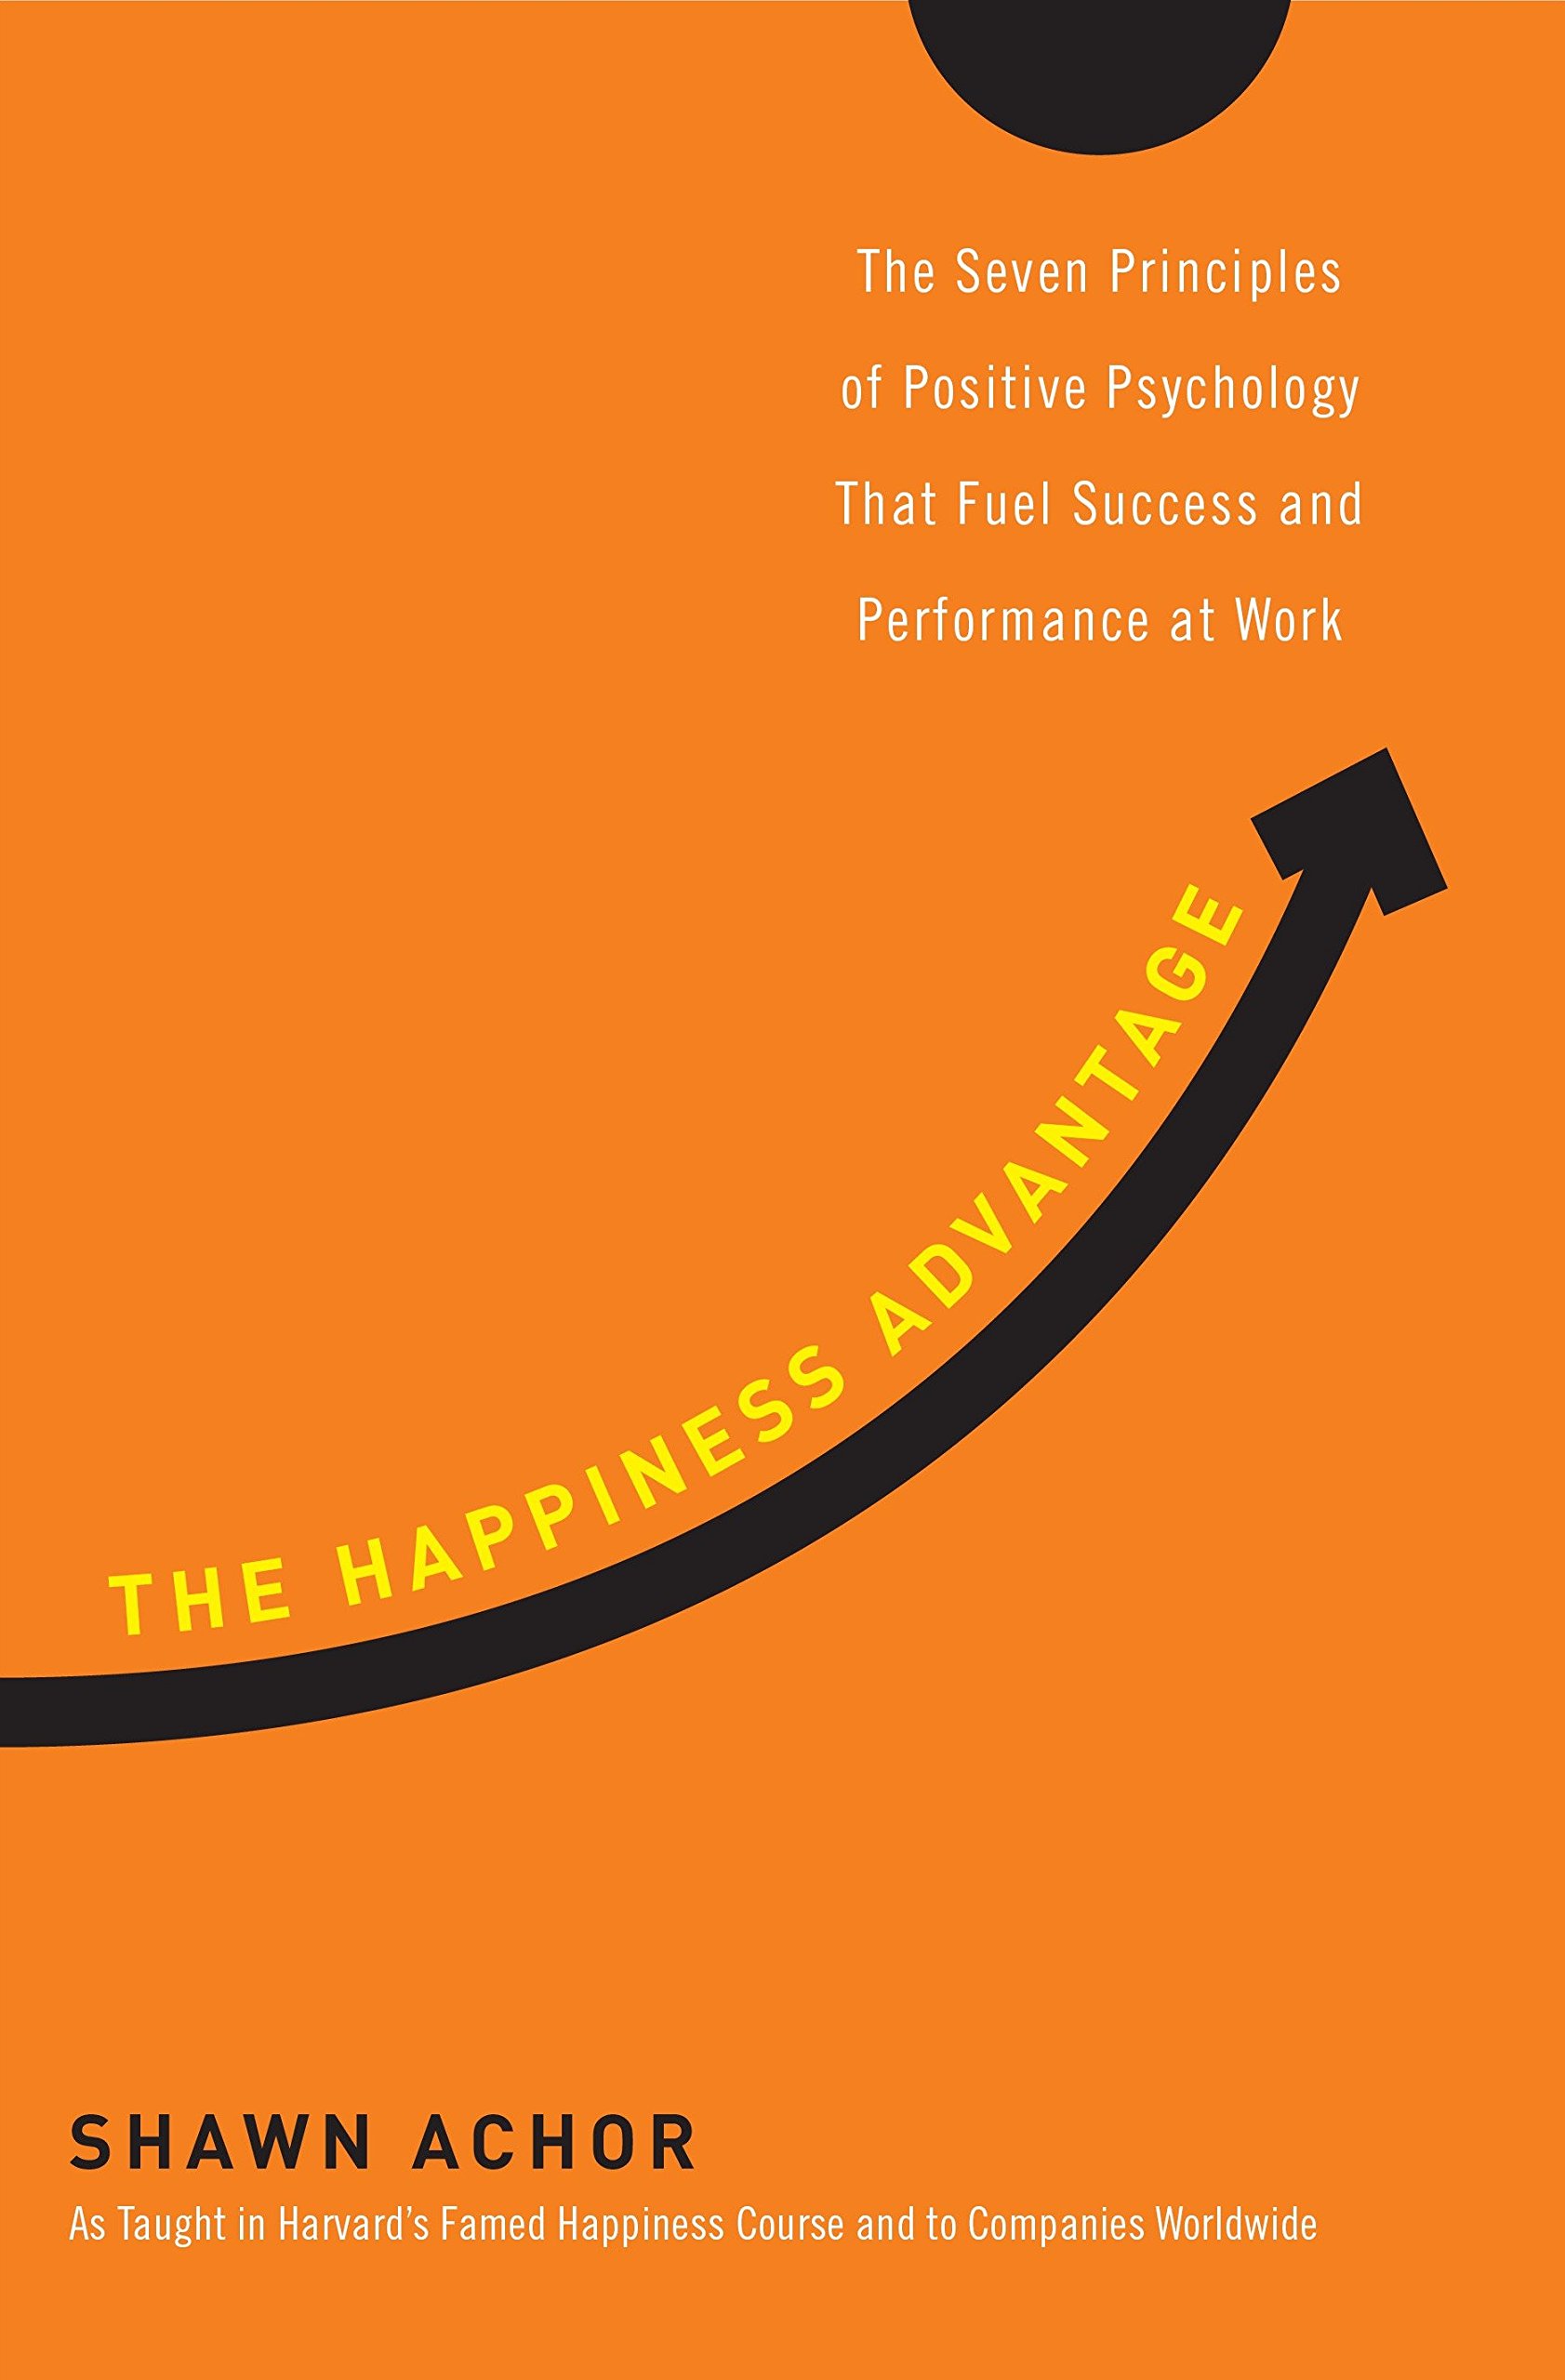 Shawn Achor: The happiness advantage (EBook, 2010, Crown Business)